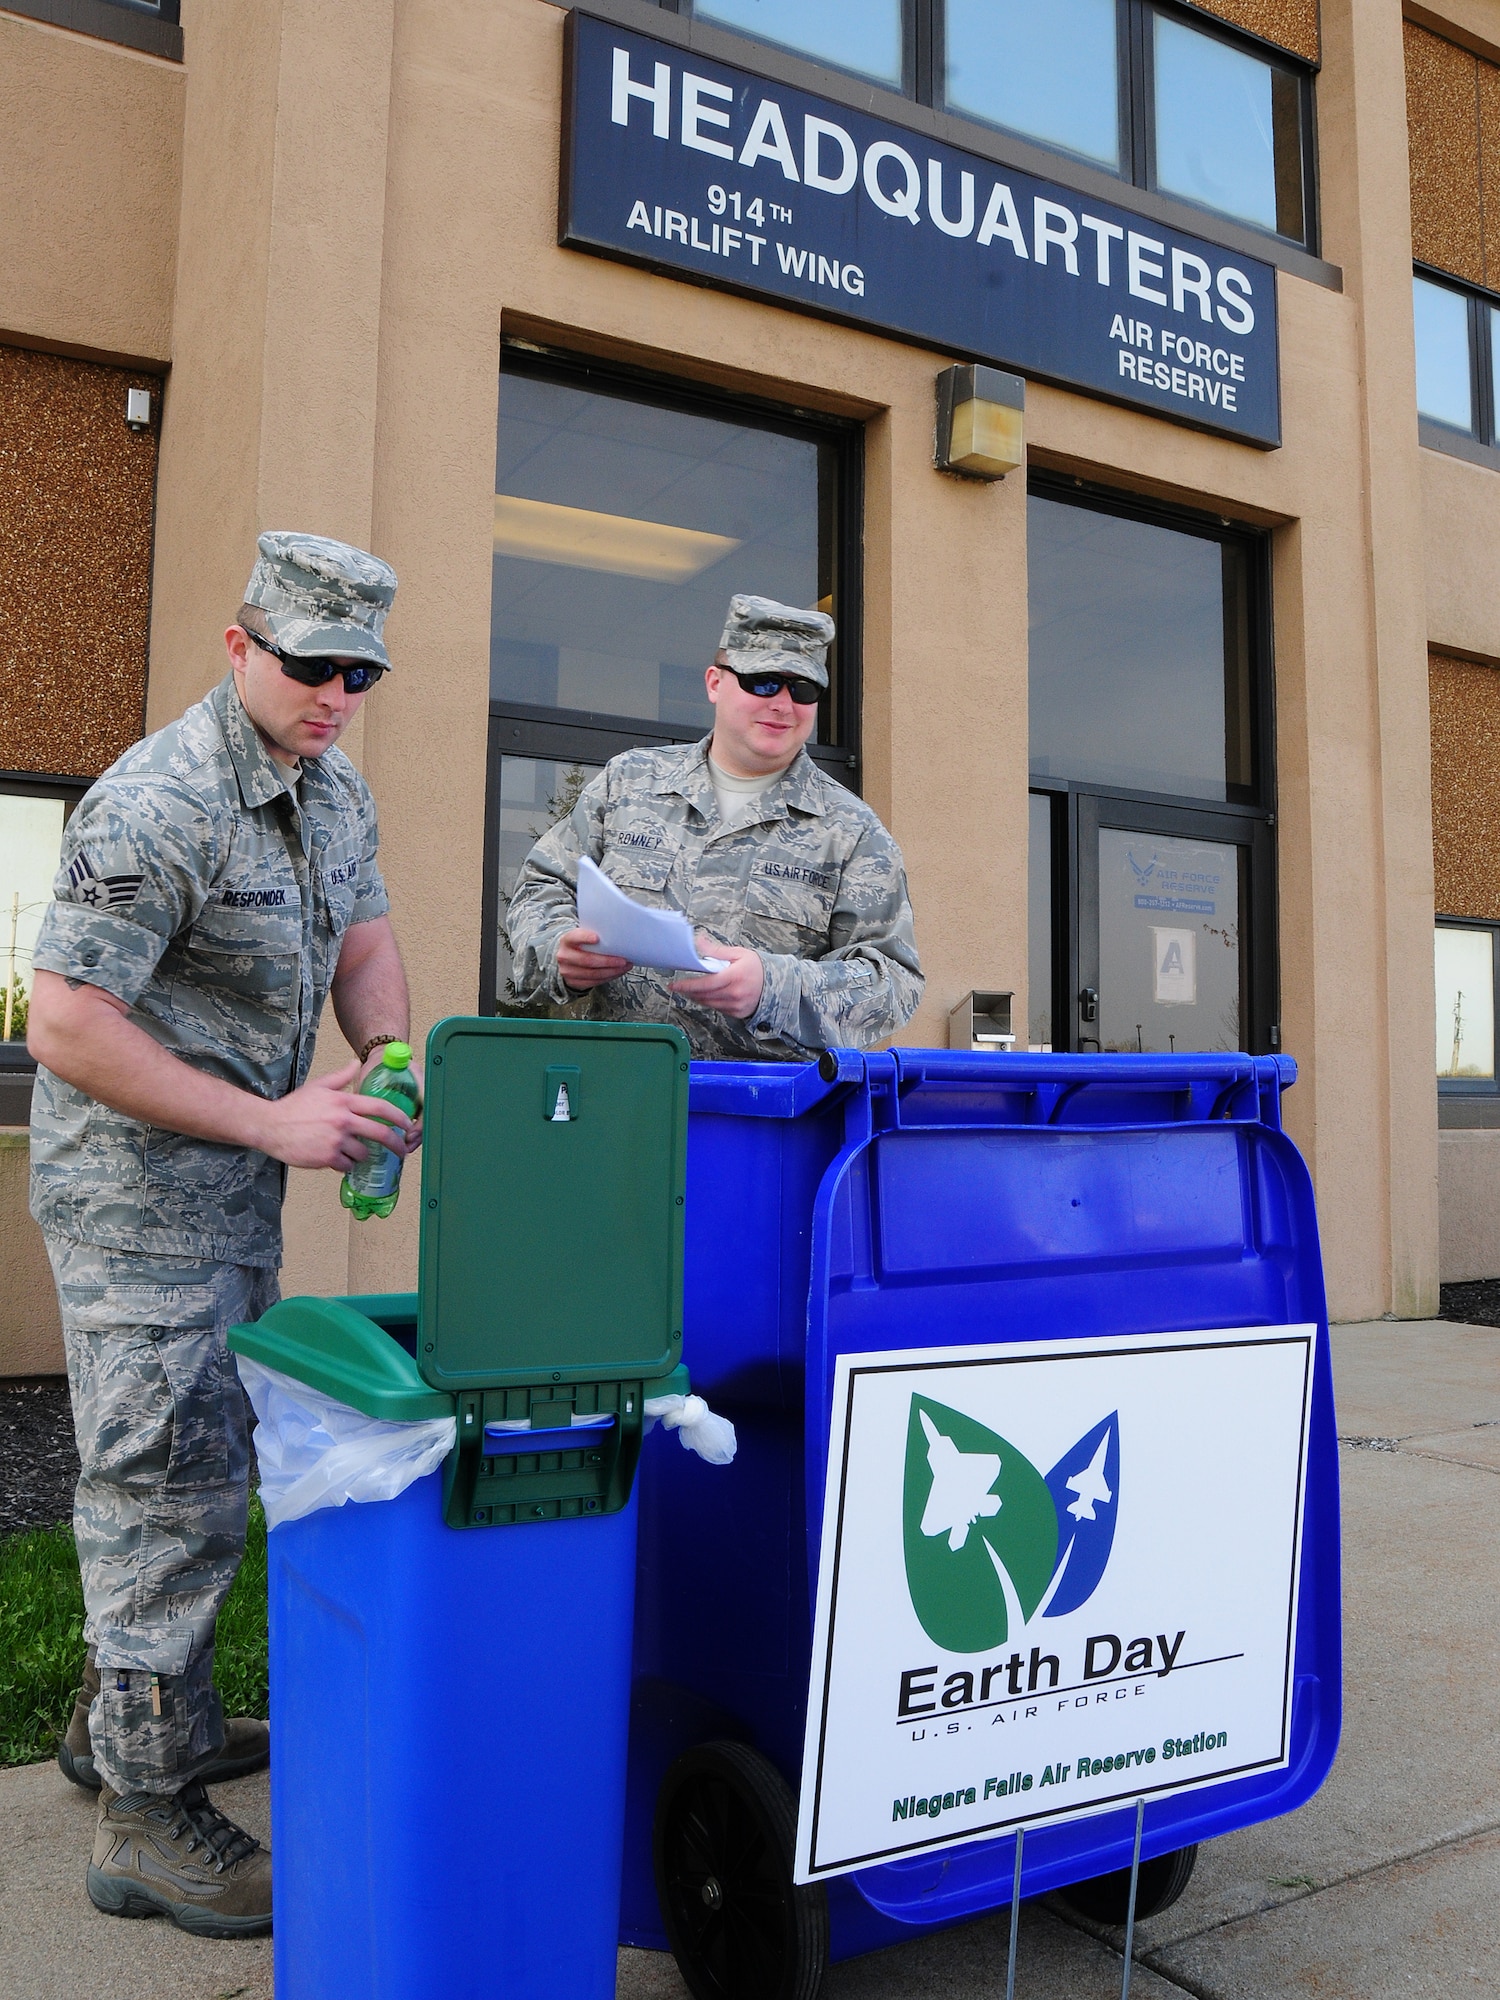 Senior Airman Nick Respondek, 914th Airlift Wing public affairs knowledge operations manager (left) and Staff Sgt. Jordan Romney, 914th Mission Support Group command support staff do their part to recycle at Niagara Falls Air Reserve Station, NY on April 20, 2012. Earth Day officially is April 22, but members at Niagara ARS participate in many recycling programs throughout the year. (U.S. Air Force photo by Peter Borys)